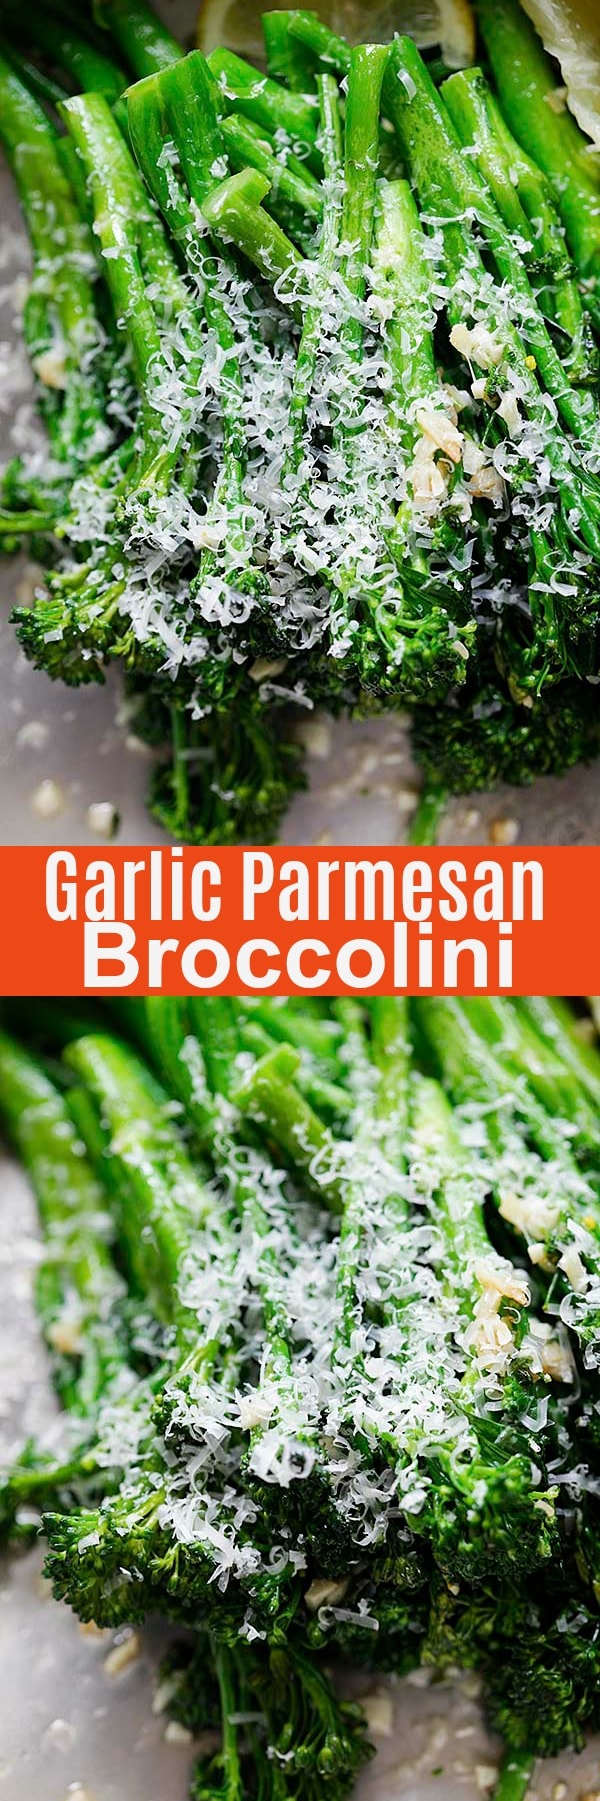 Garlic Parmesan Broccolini - easy and delicious way to cook broccolini! This recipe calls for 5 ingredients and takes only 10 minutes. A perfect side dish for every meal. 